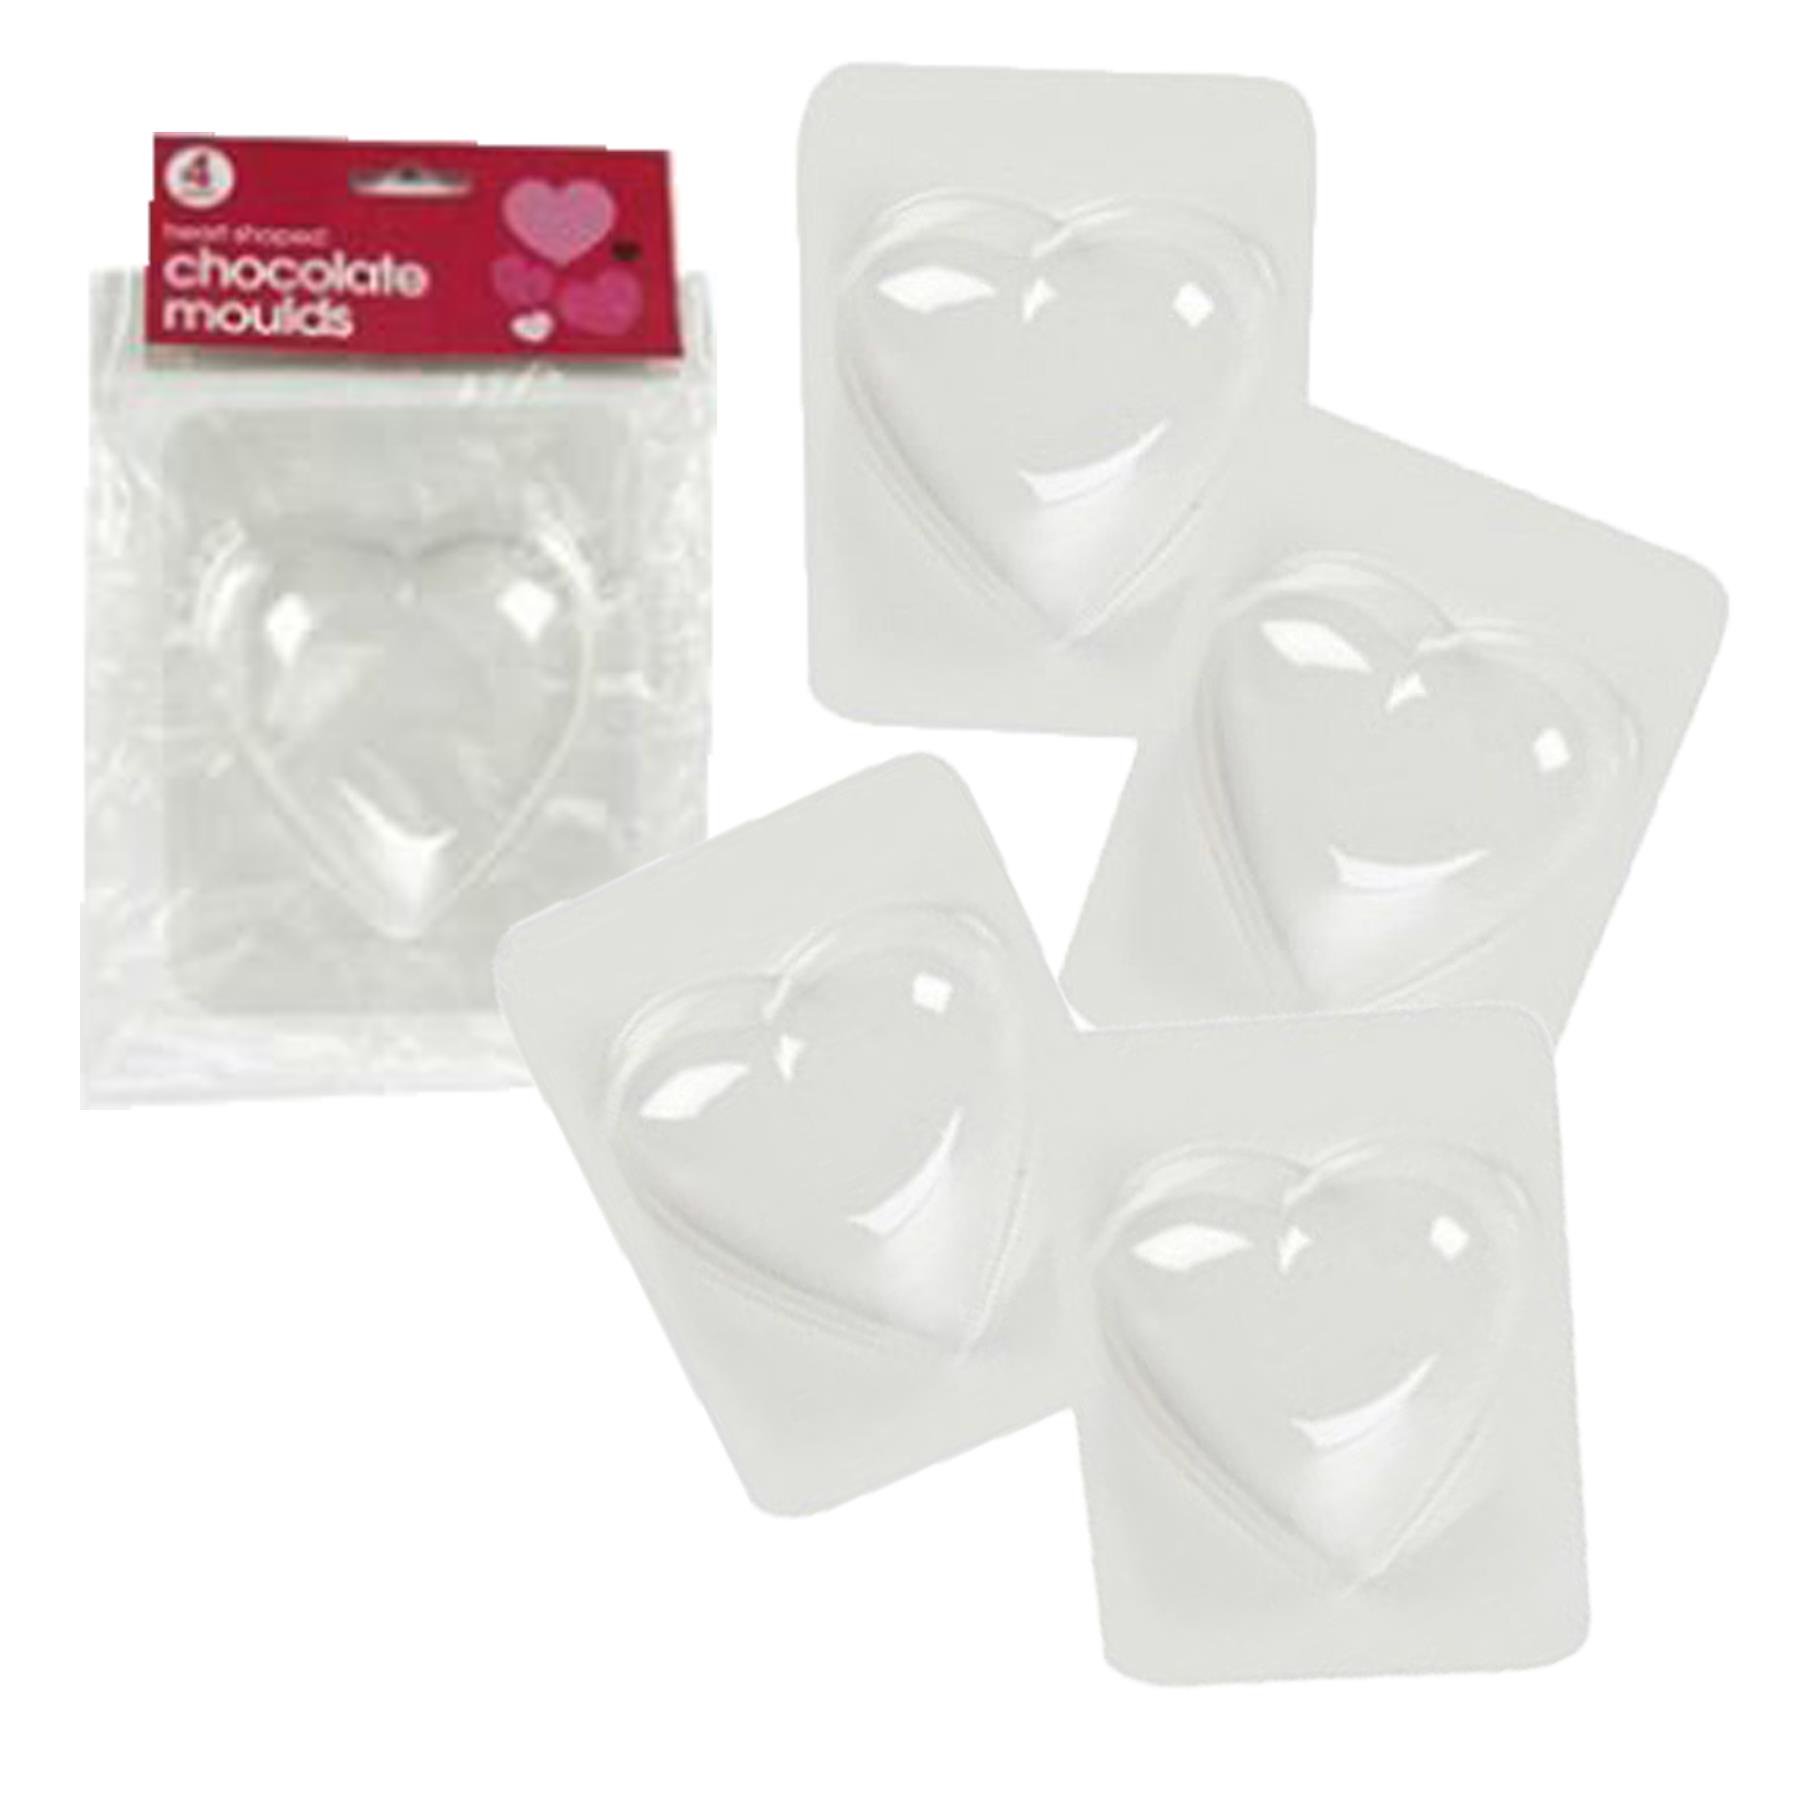 Make Your Own Chocolate Heart Moulds - 4 Pack 9cm x 10cm